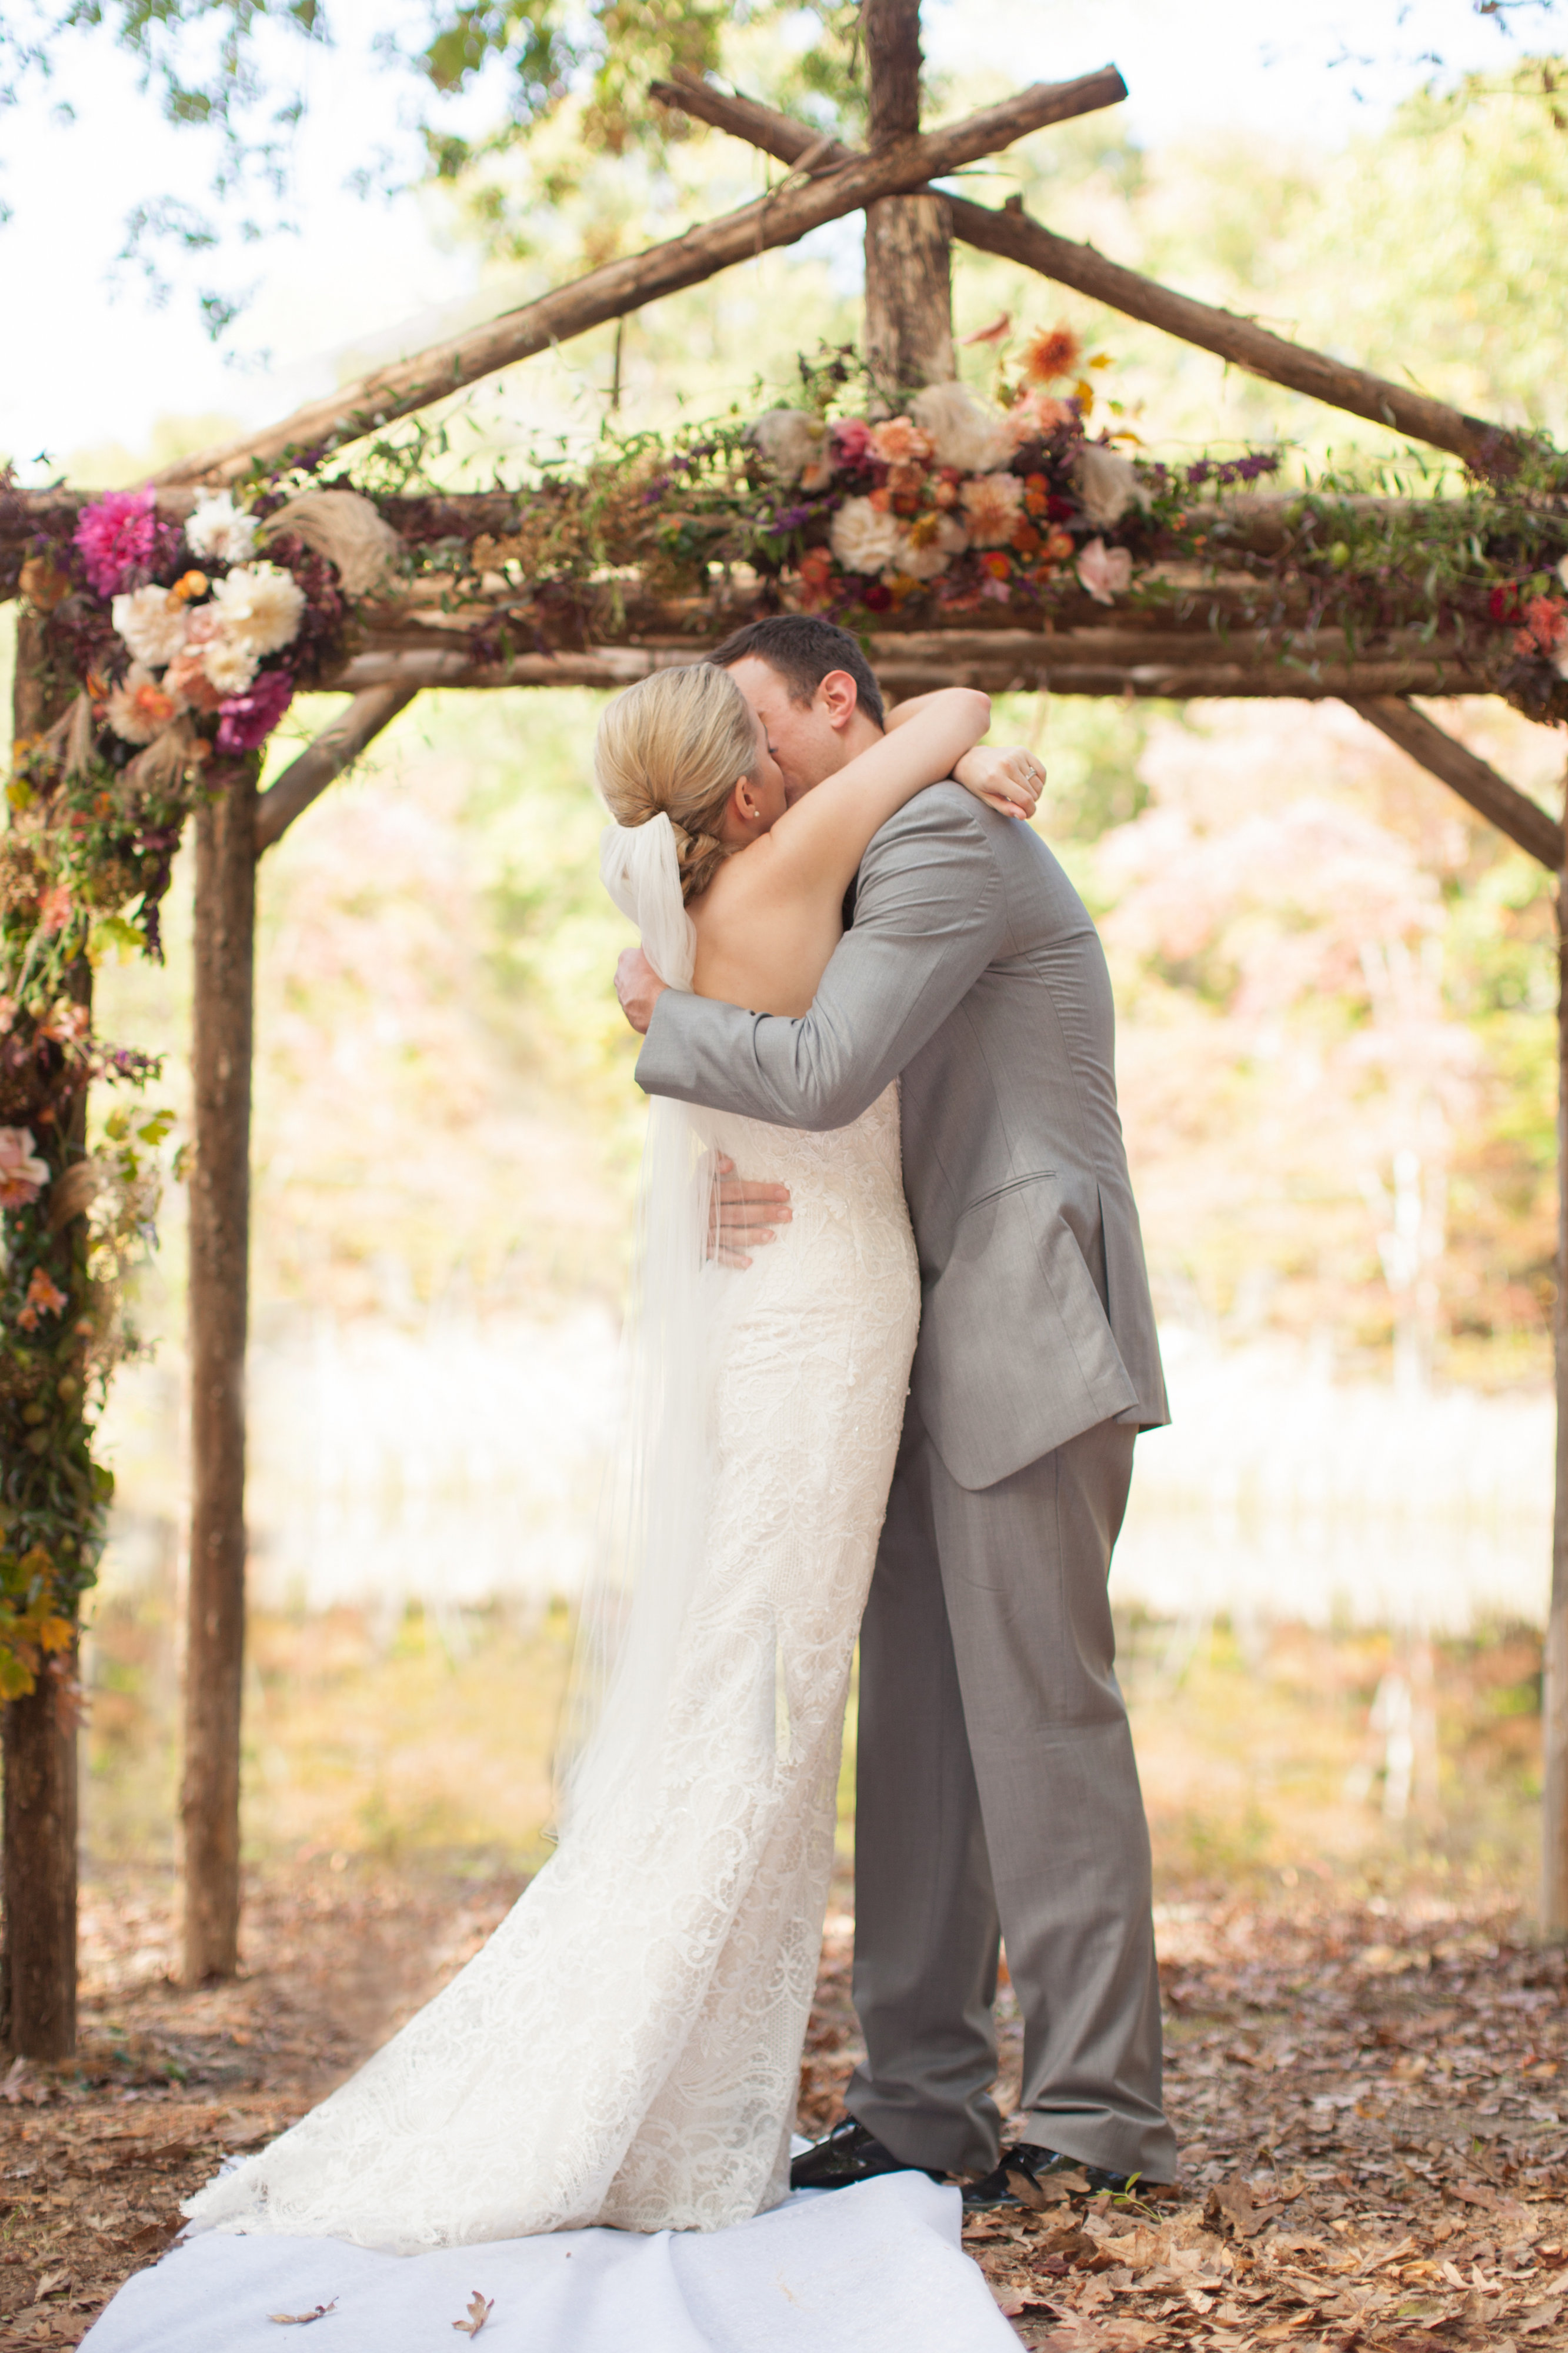 View More: http://lillianpaigephotography.pass.us/roywedding